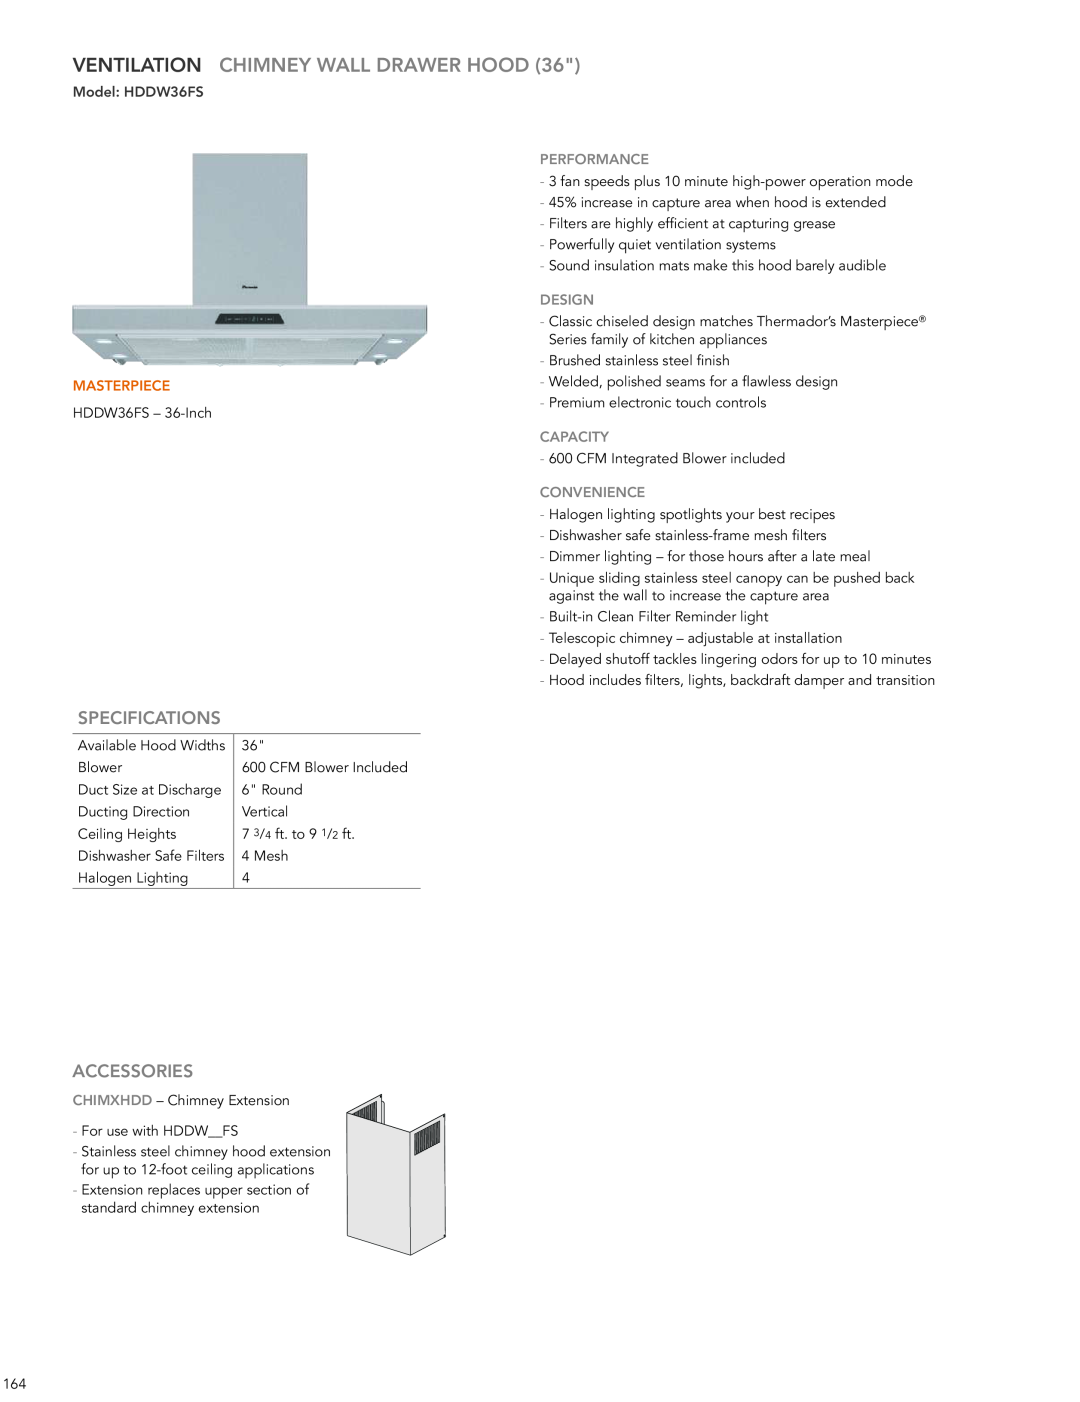 Thermador HMWB36FS Ventilation Chimney Wall Drawer Hood, Model HDDW36FS, Specifications, Accessories, Masterpiece, DESIgN 